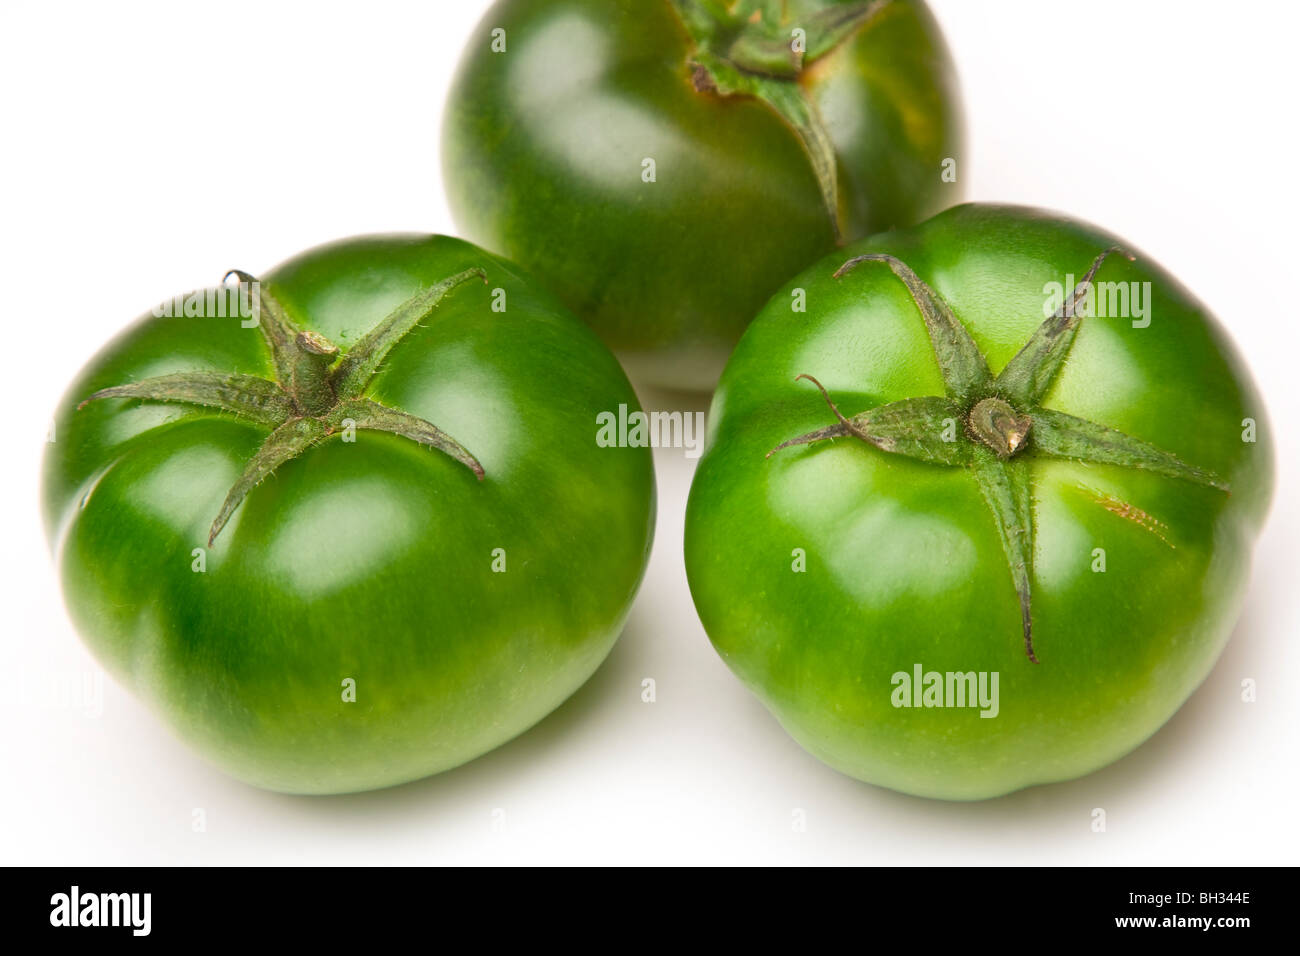 Green tomatoes on a white background Stock Photo